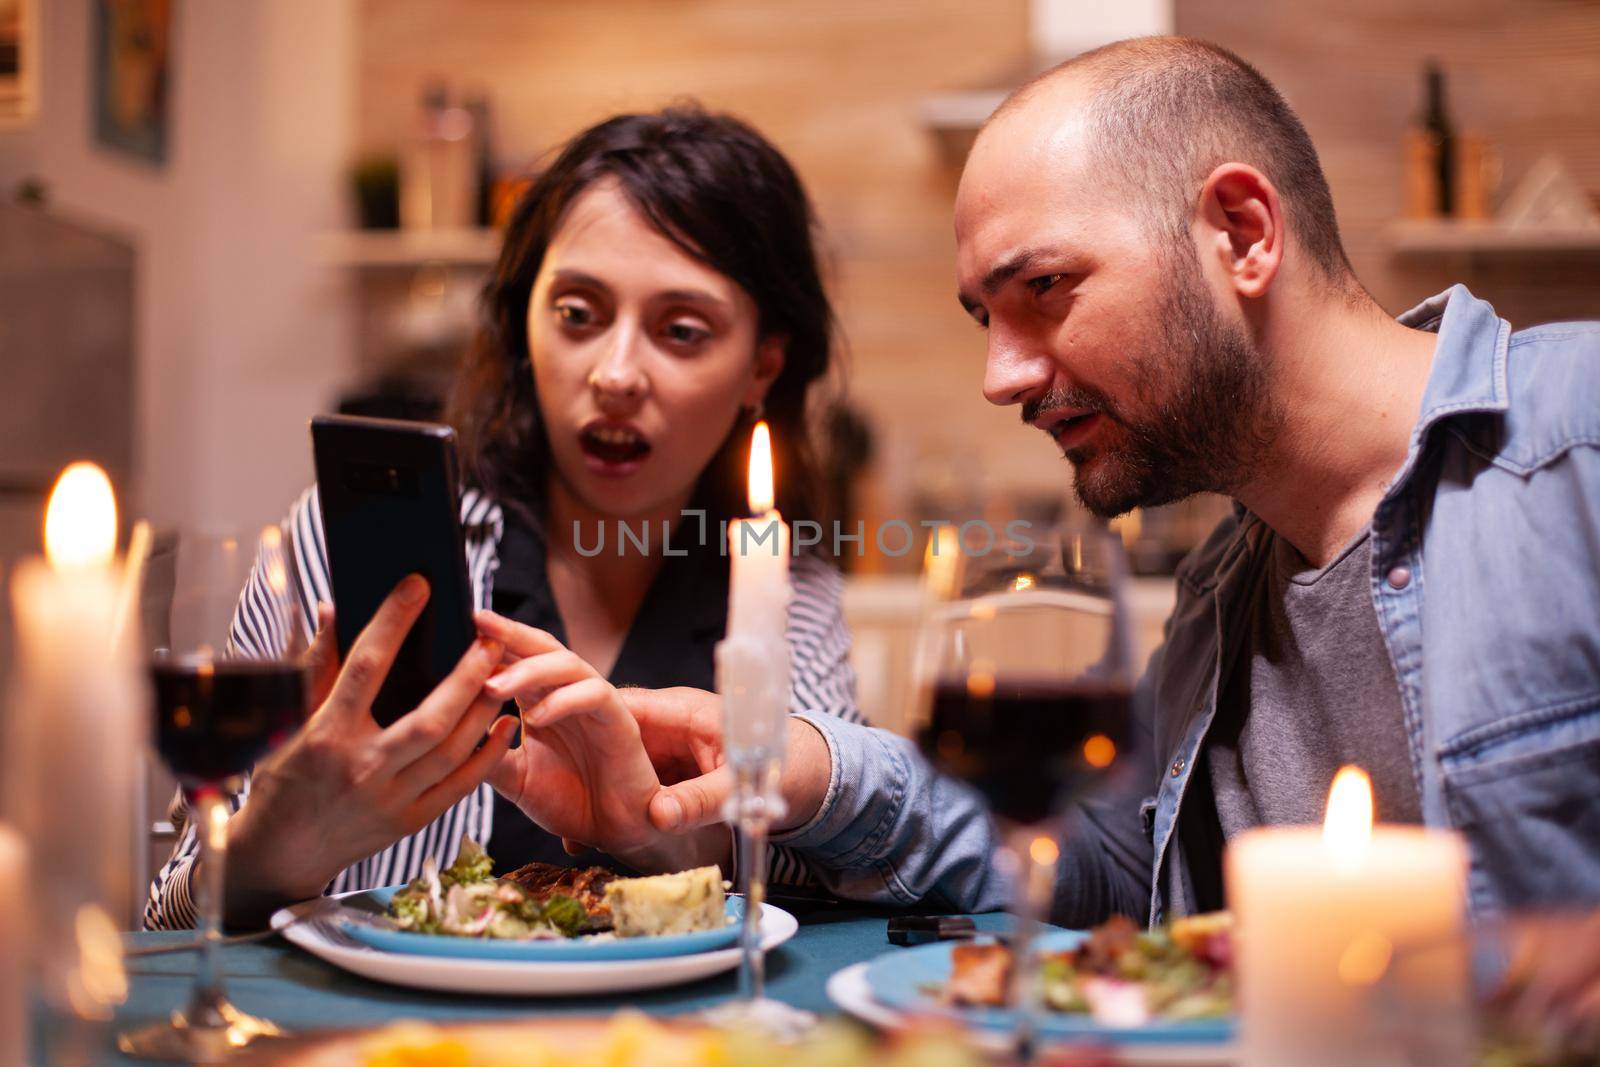 Husband and wife looking shocked at phone while having romantic dinner in kitchen Adults sitting at the table in the kitchen browsing, searching, using smartphones, internet, celebrating anniversary.